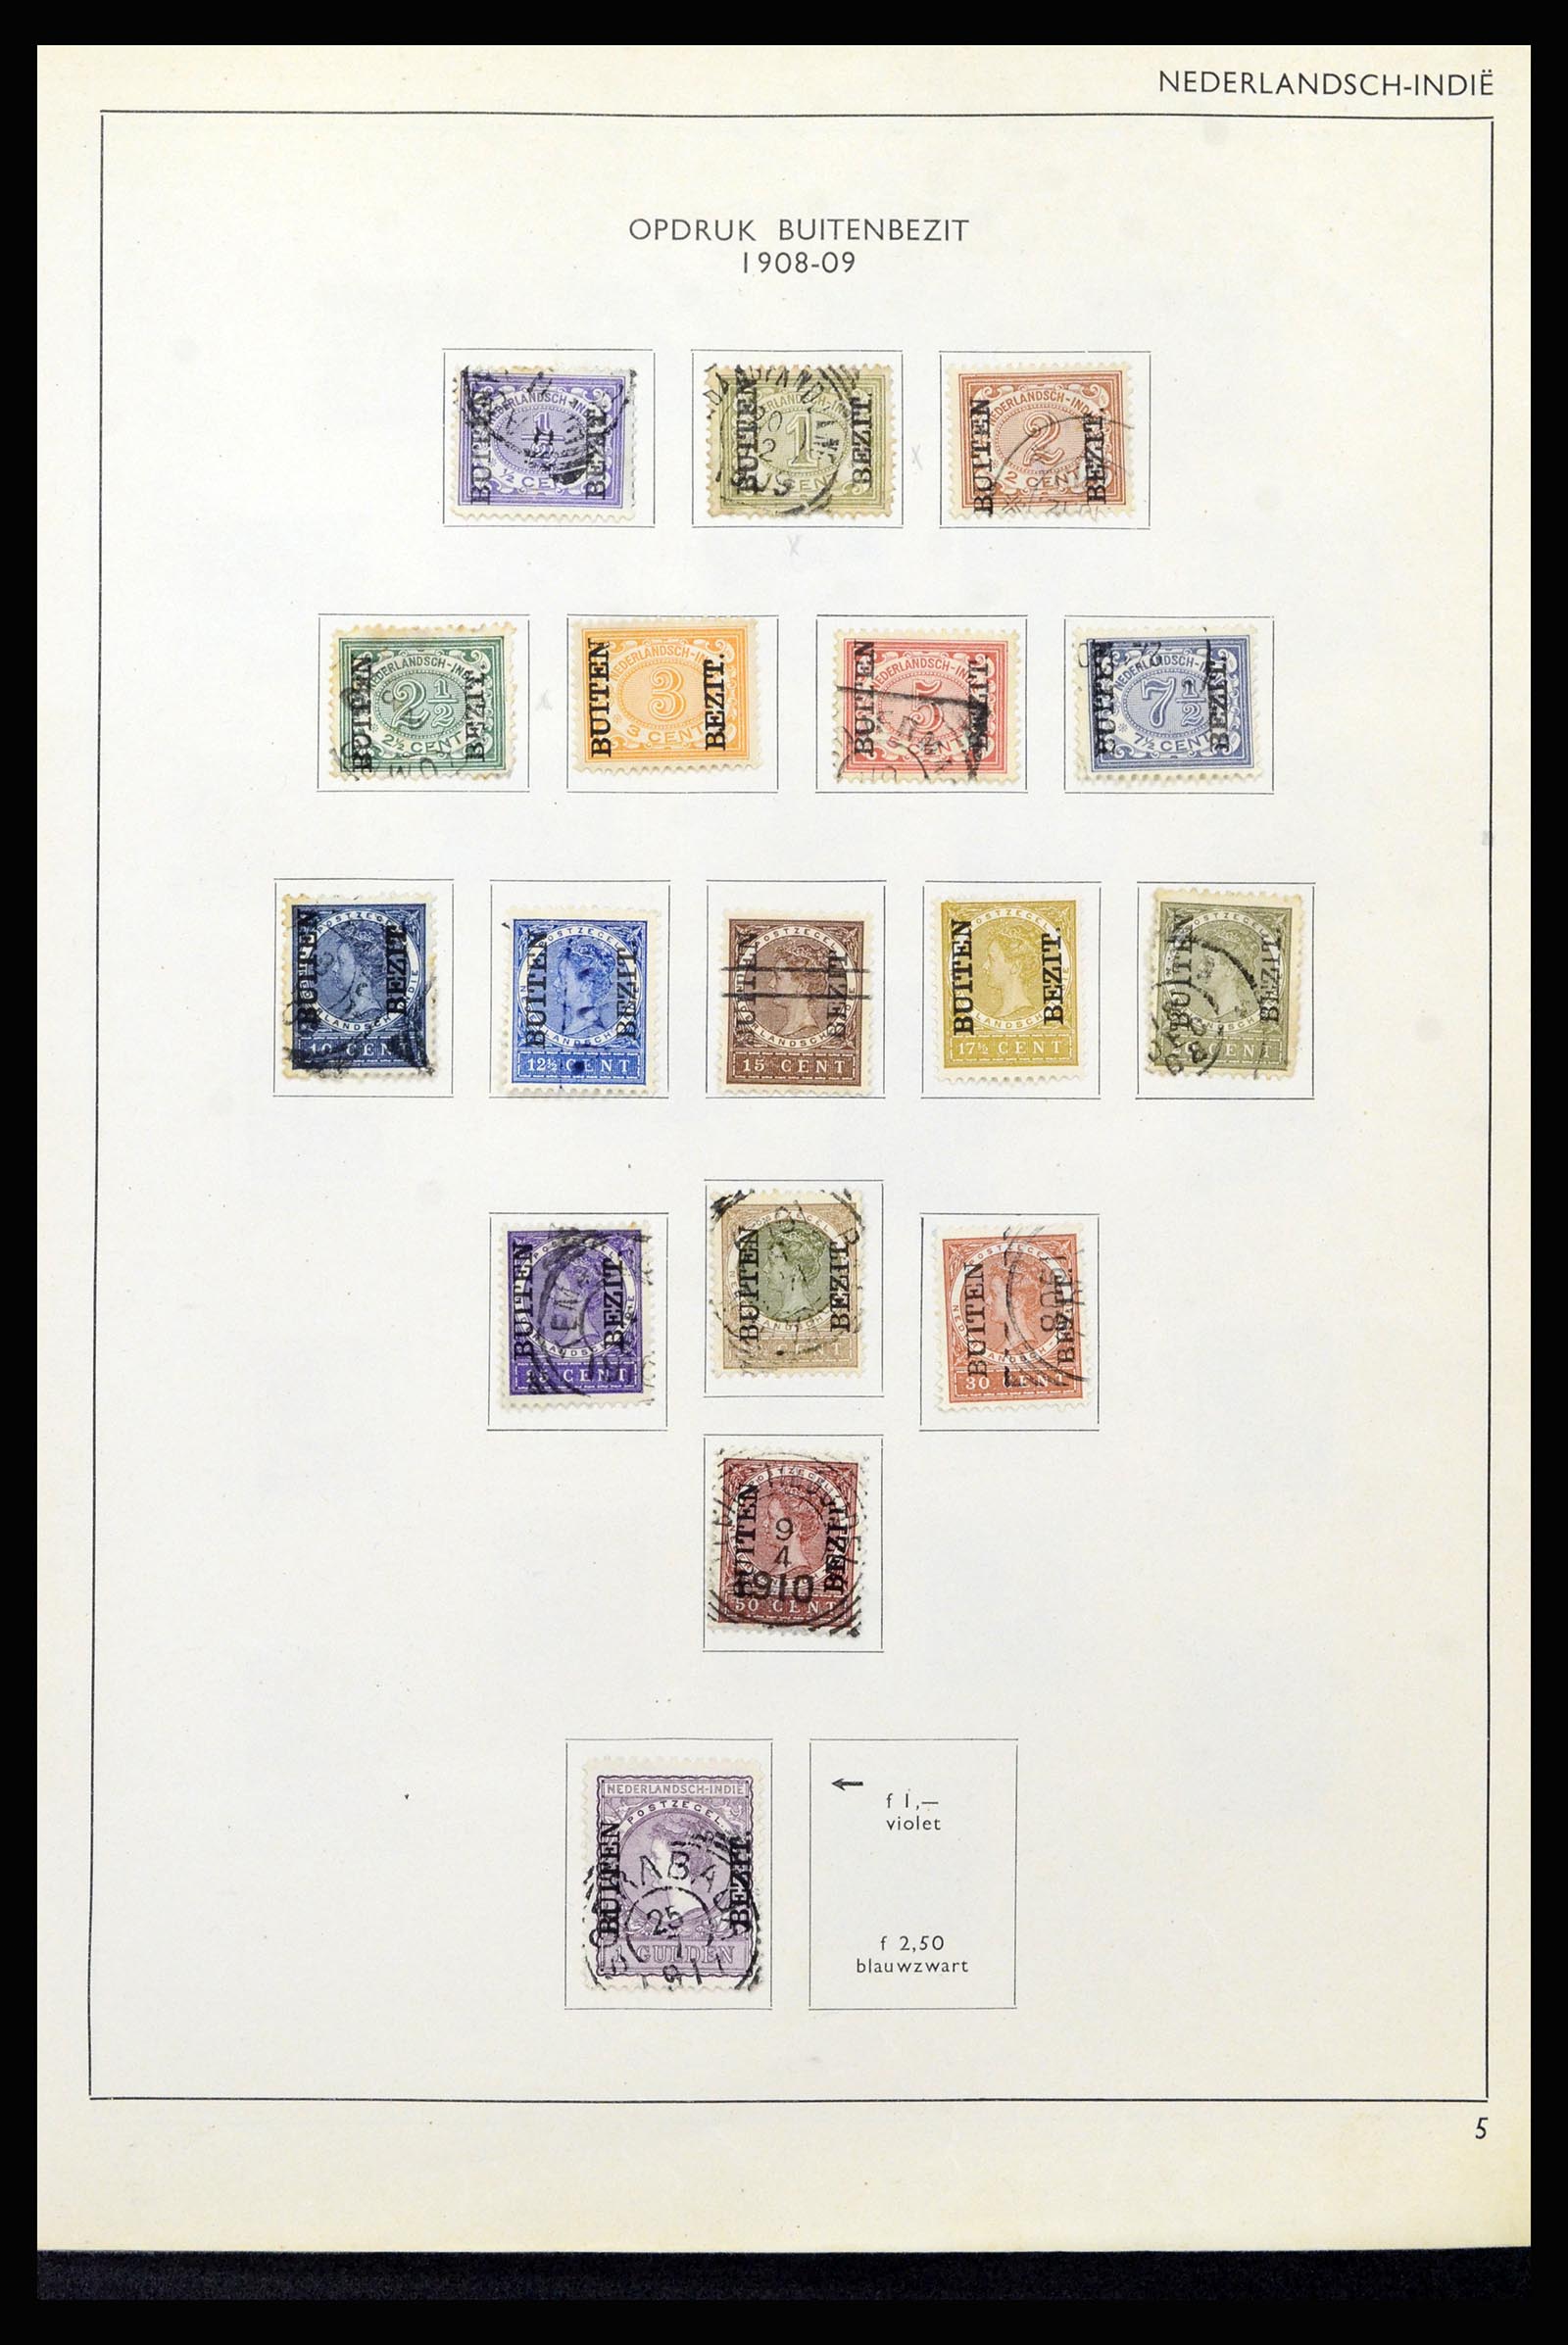 37217 005 - Stamp collection 37217 Dutch territories 1864-1975.